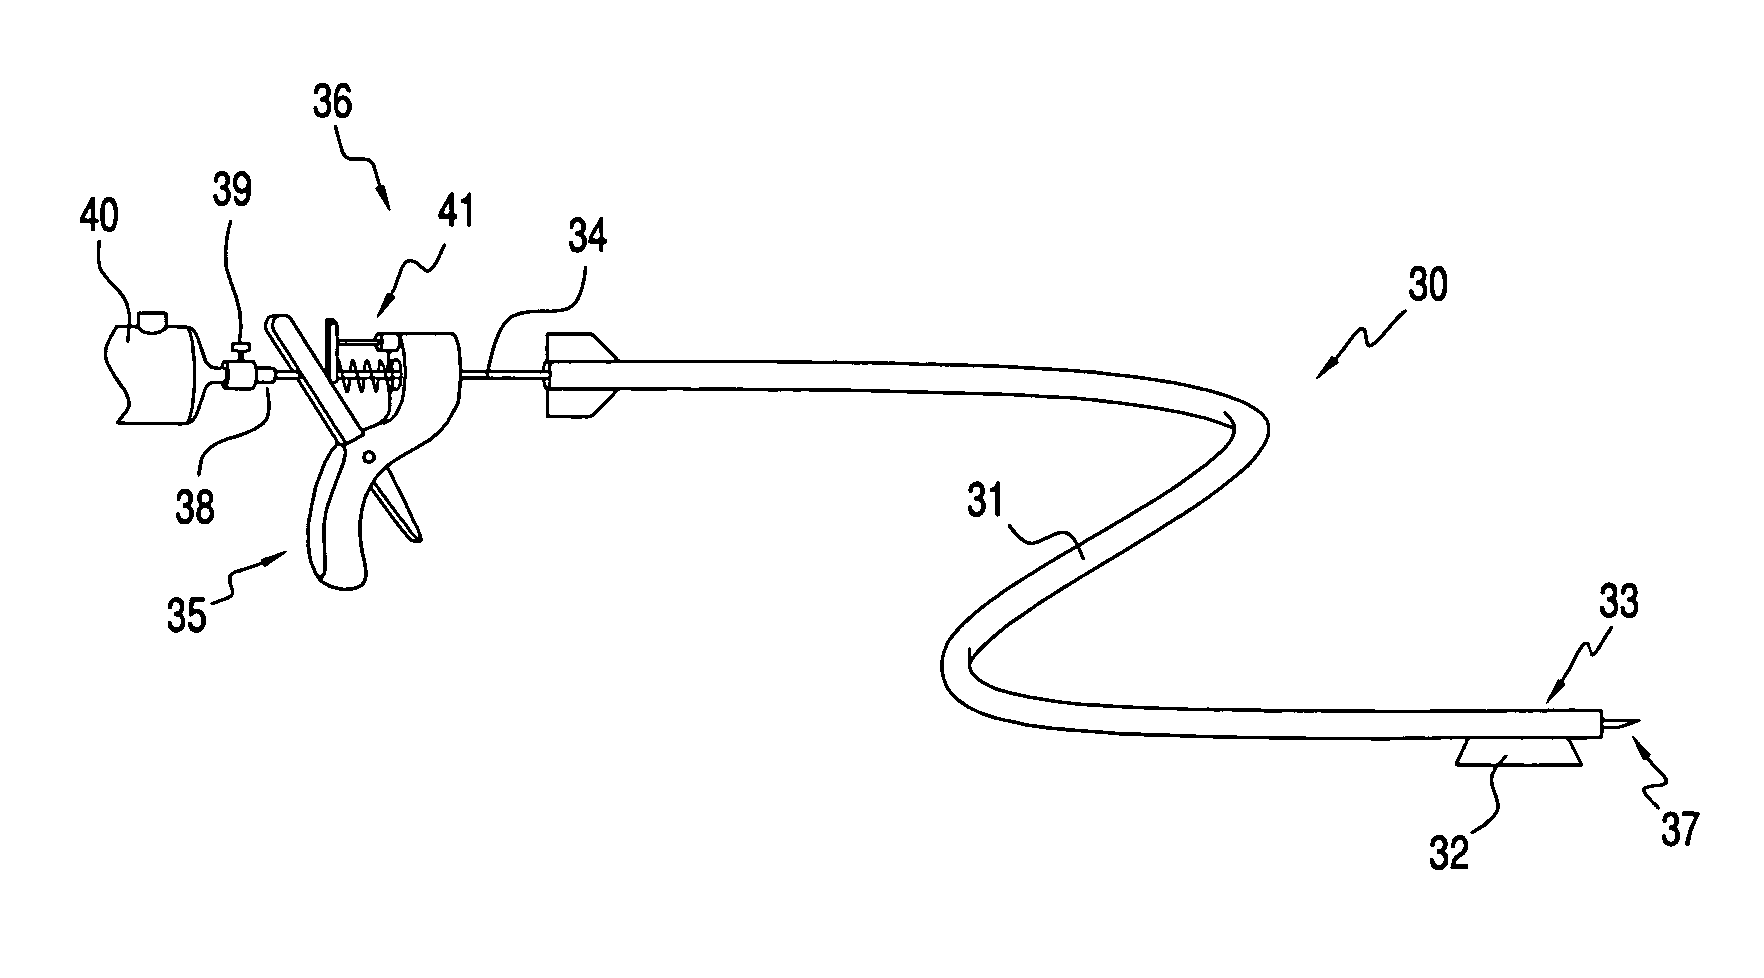 Systems and methods for atraumatic implantation of bio-active agents